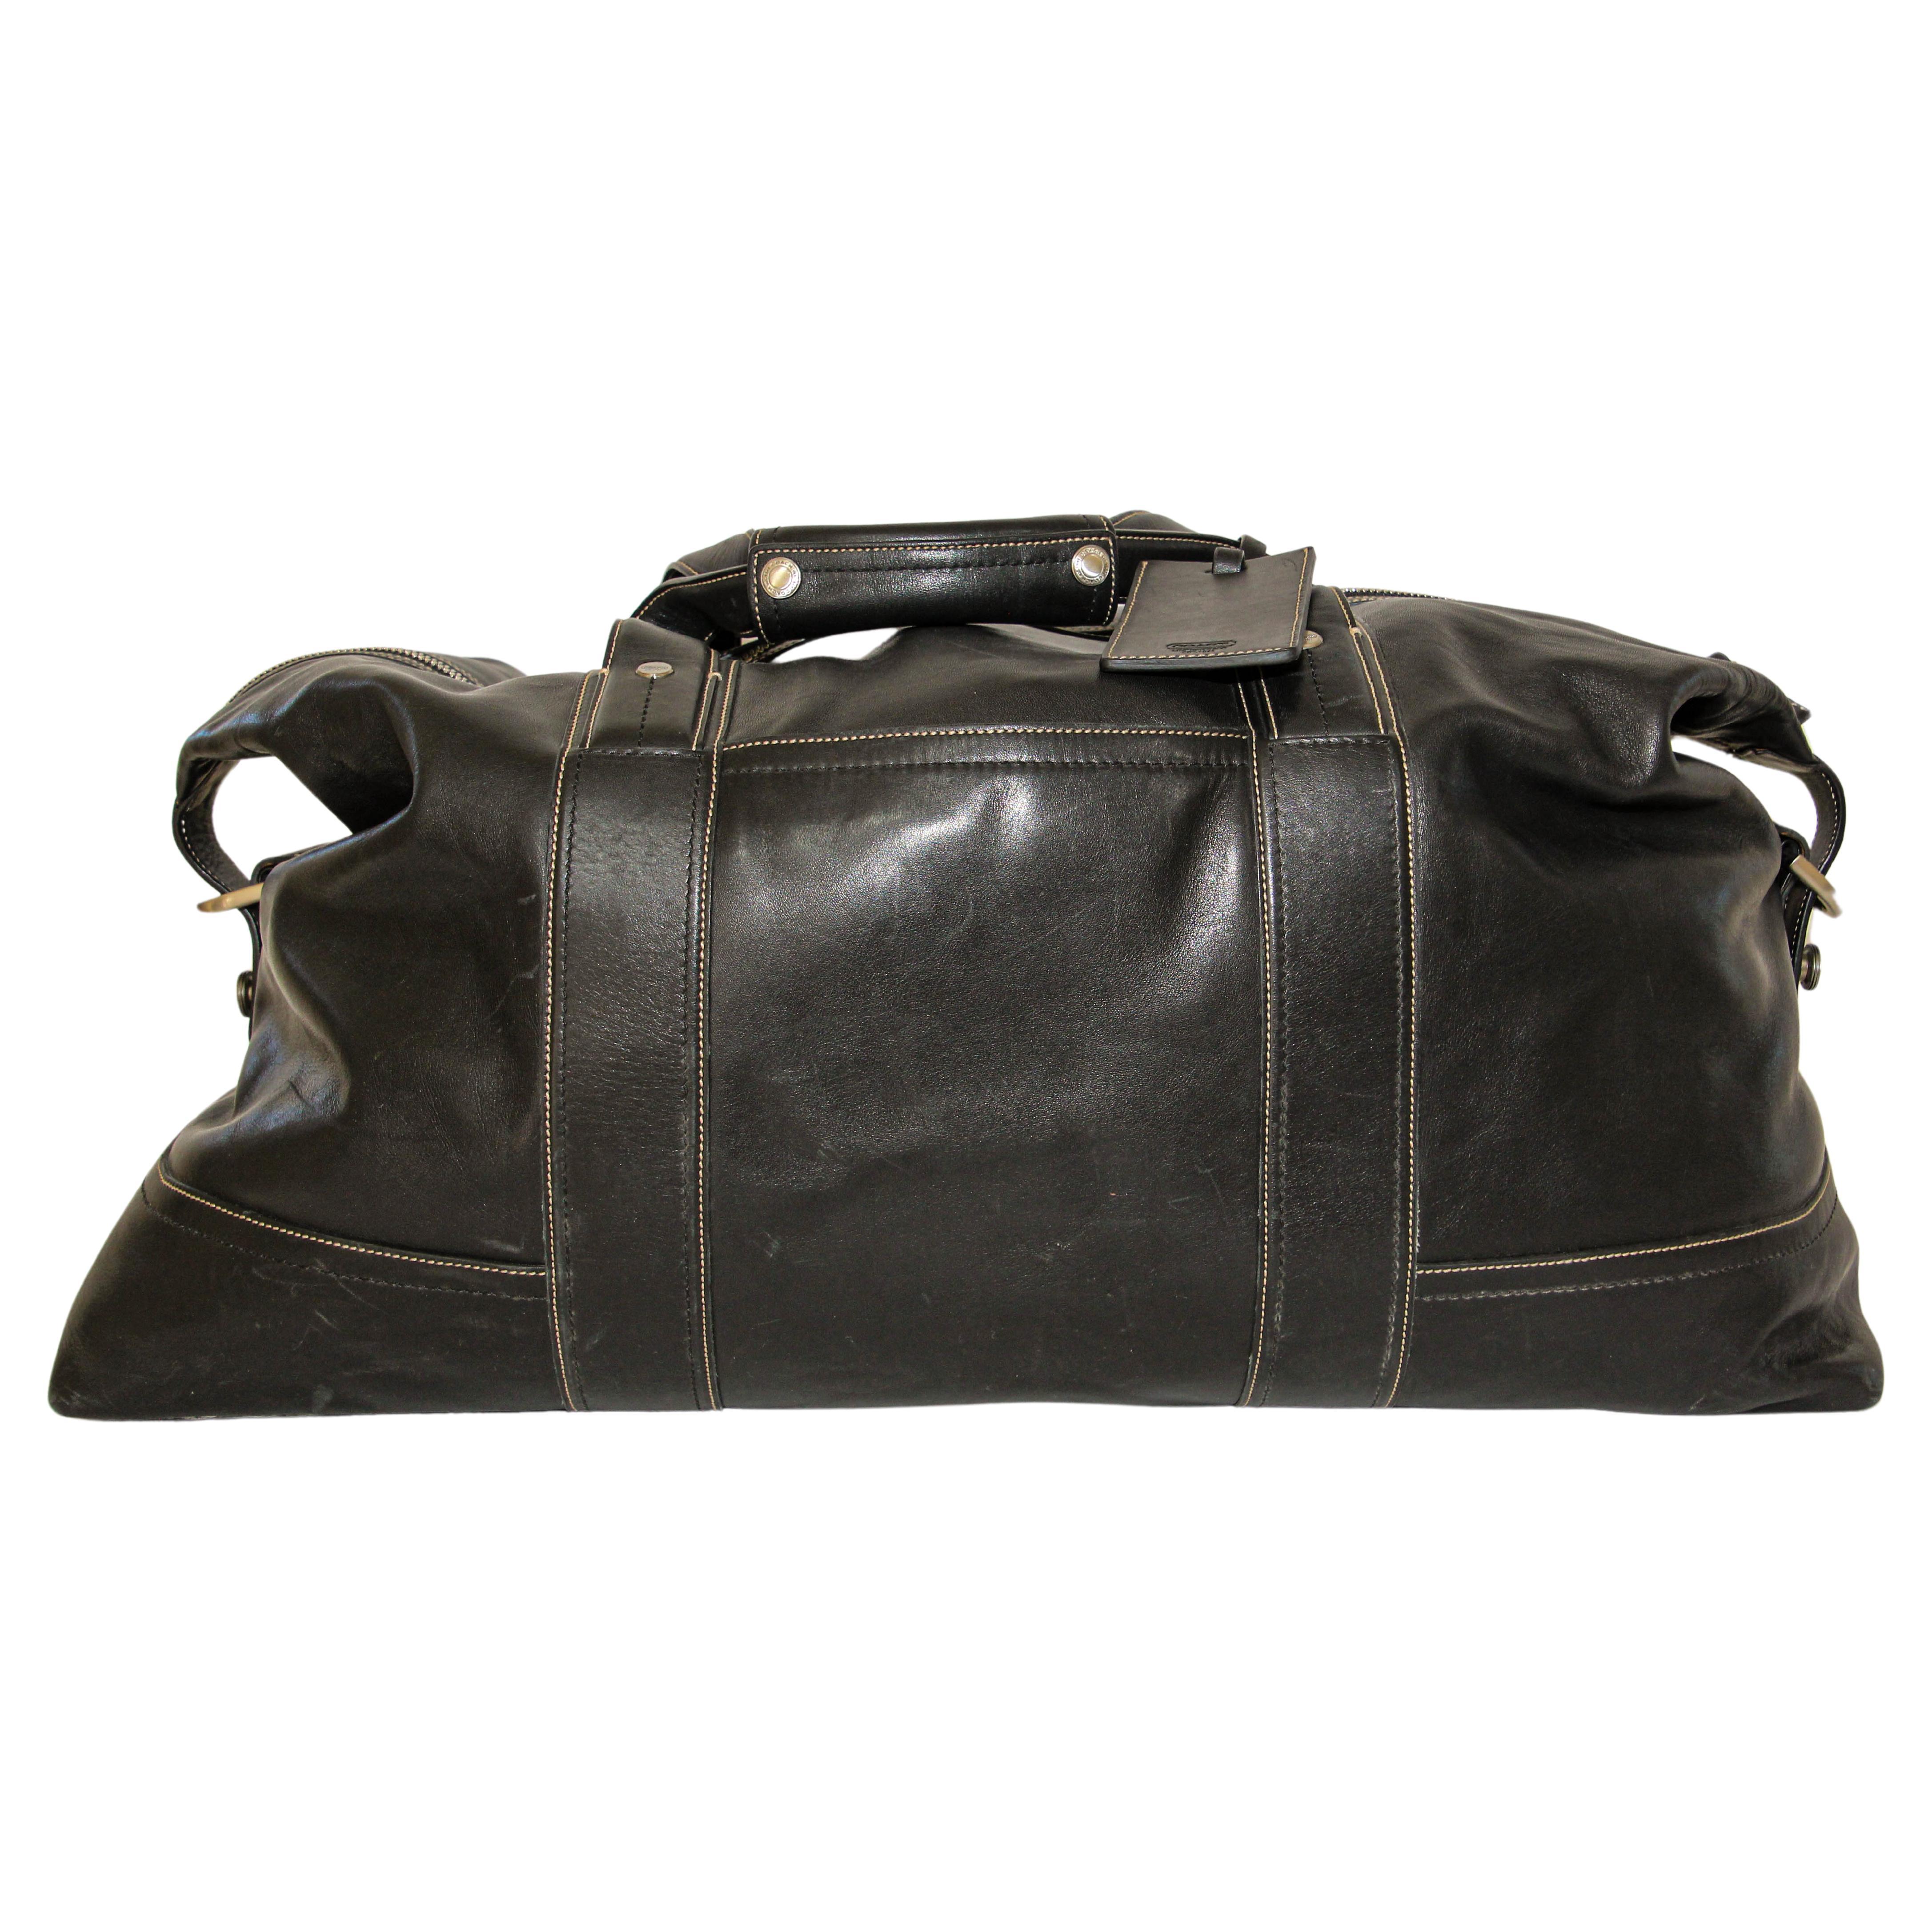 Coach Vintage Black Leather Men's Carry all Travel Duffle Bag.
Explore sophistication and convenience with this large Vintage Coach Black Leather Travel Bag. Crafted from premium black leather, this high-quality travel companion exudes durability